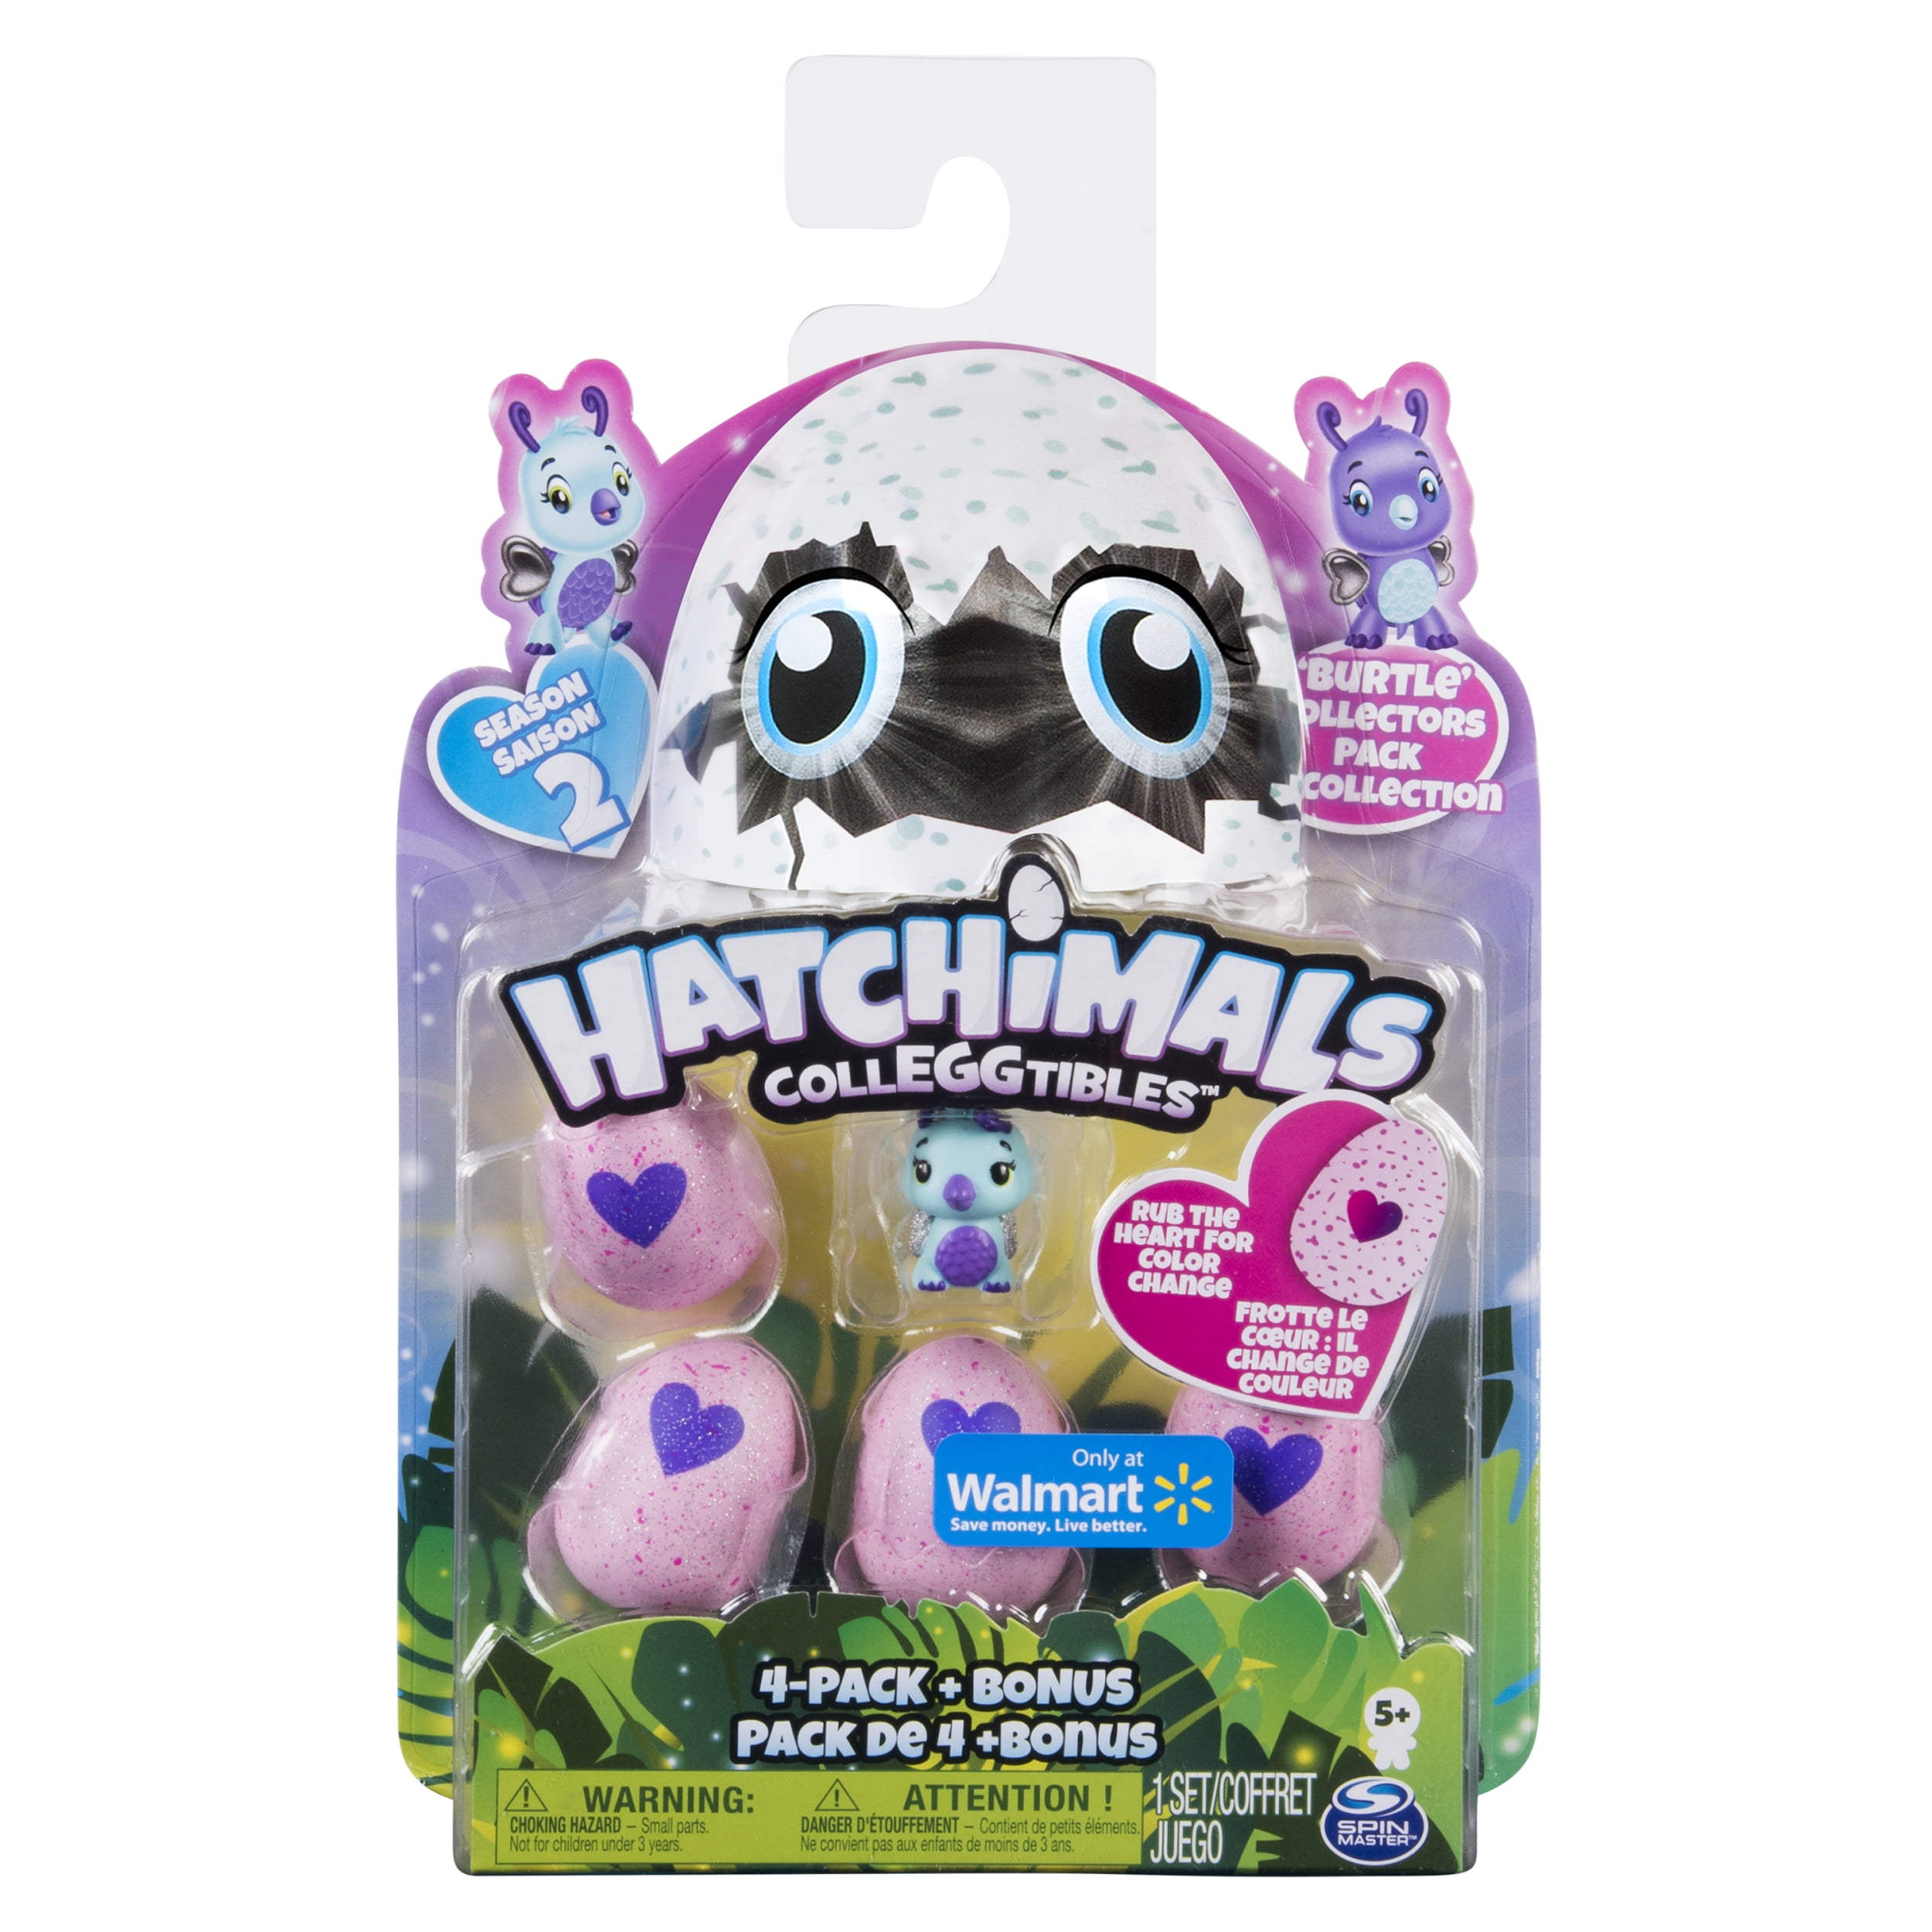 Hatchimals Colleggtibles Blind Bags Eggs Season 1 Spin Master for sale online 